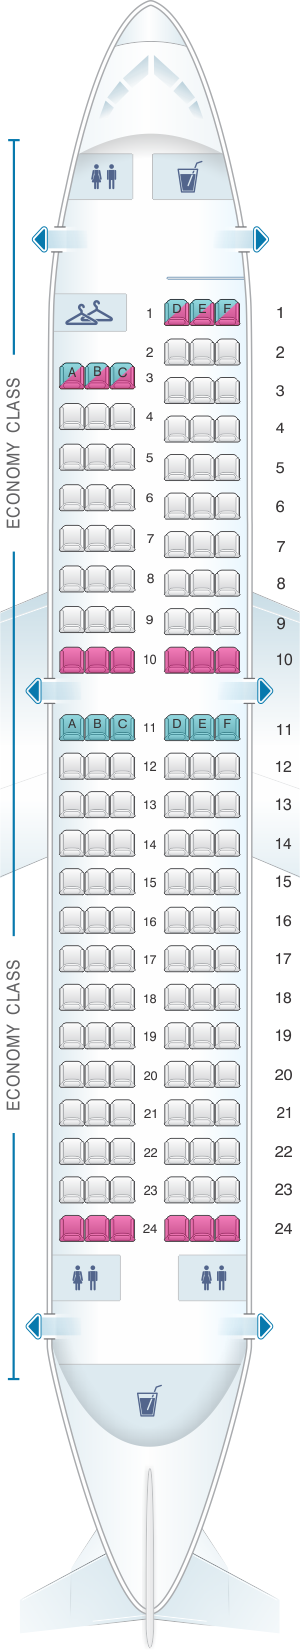 Seat map for Helvetic Airways Airbus A319